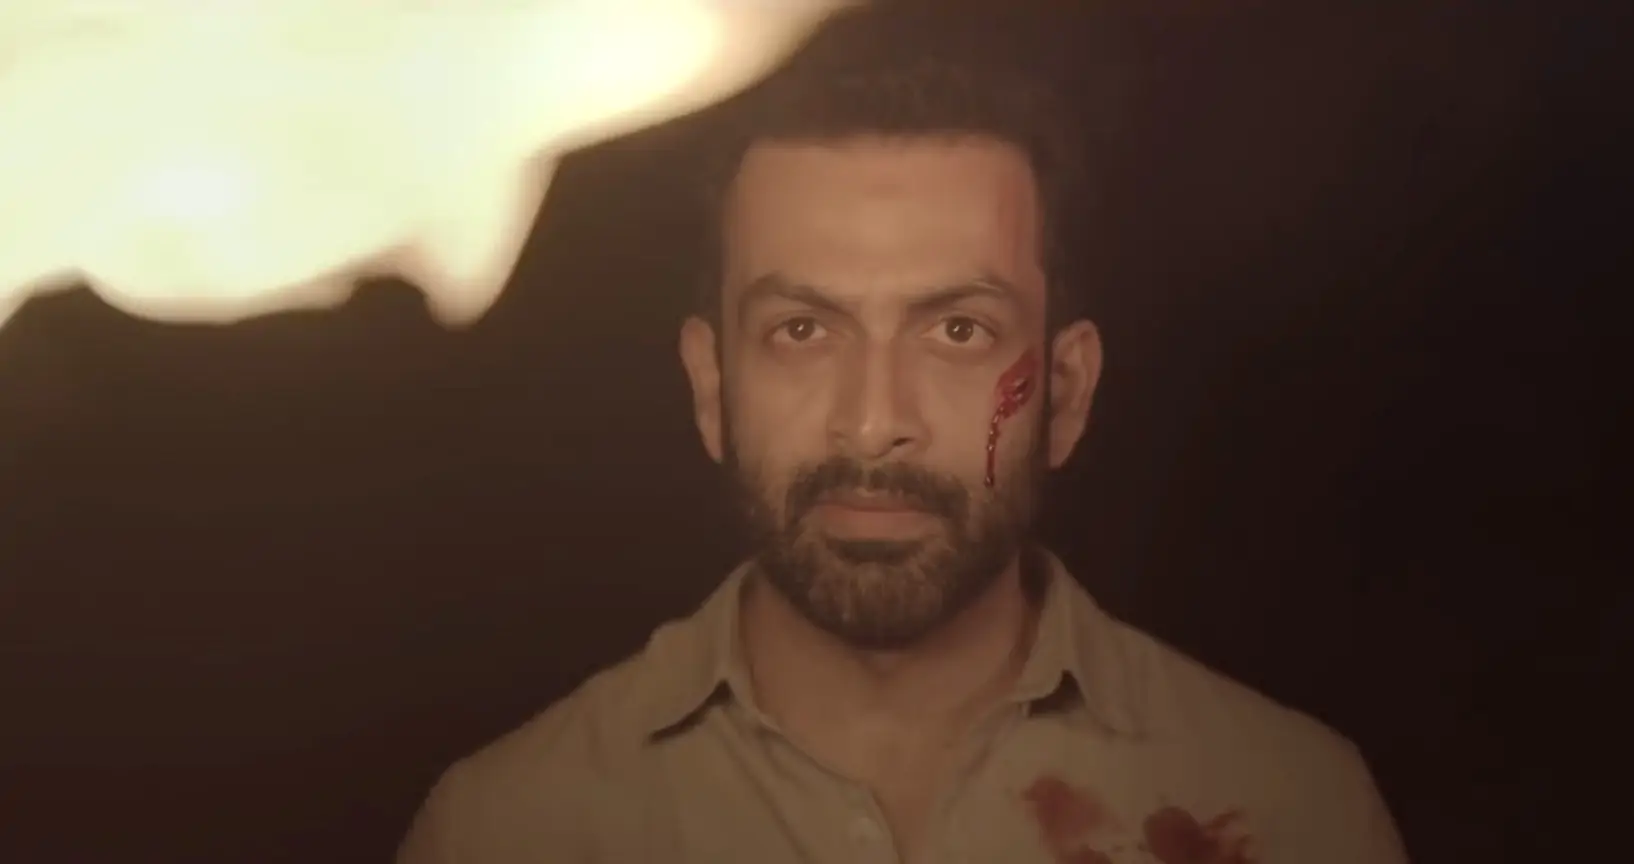 Kuruthi Trailer Talk: Prithviraj’s Next Thriller Looks Like A Battle Between Communities And The Aftereffect Of Hatred